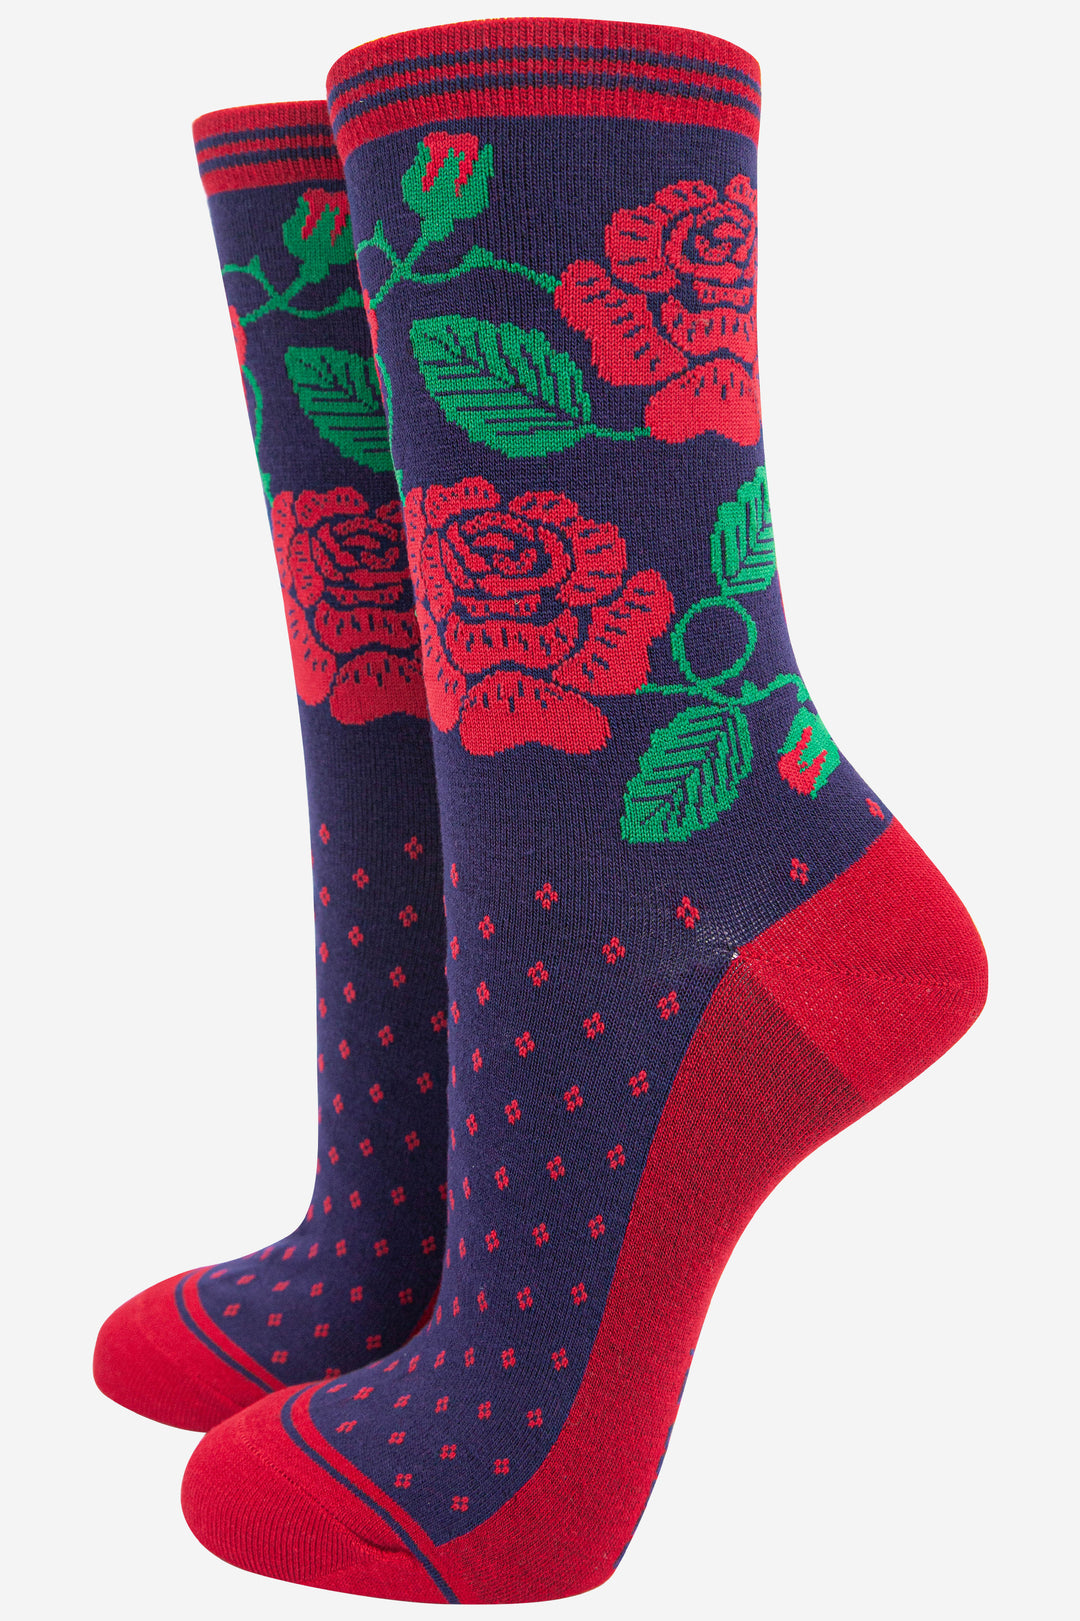 womens bamboo ankle socks in navy blue and red featuring a traditional red english rose pattern